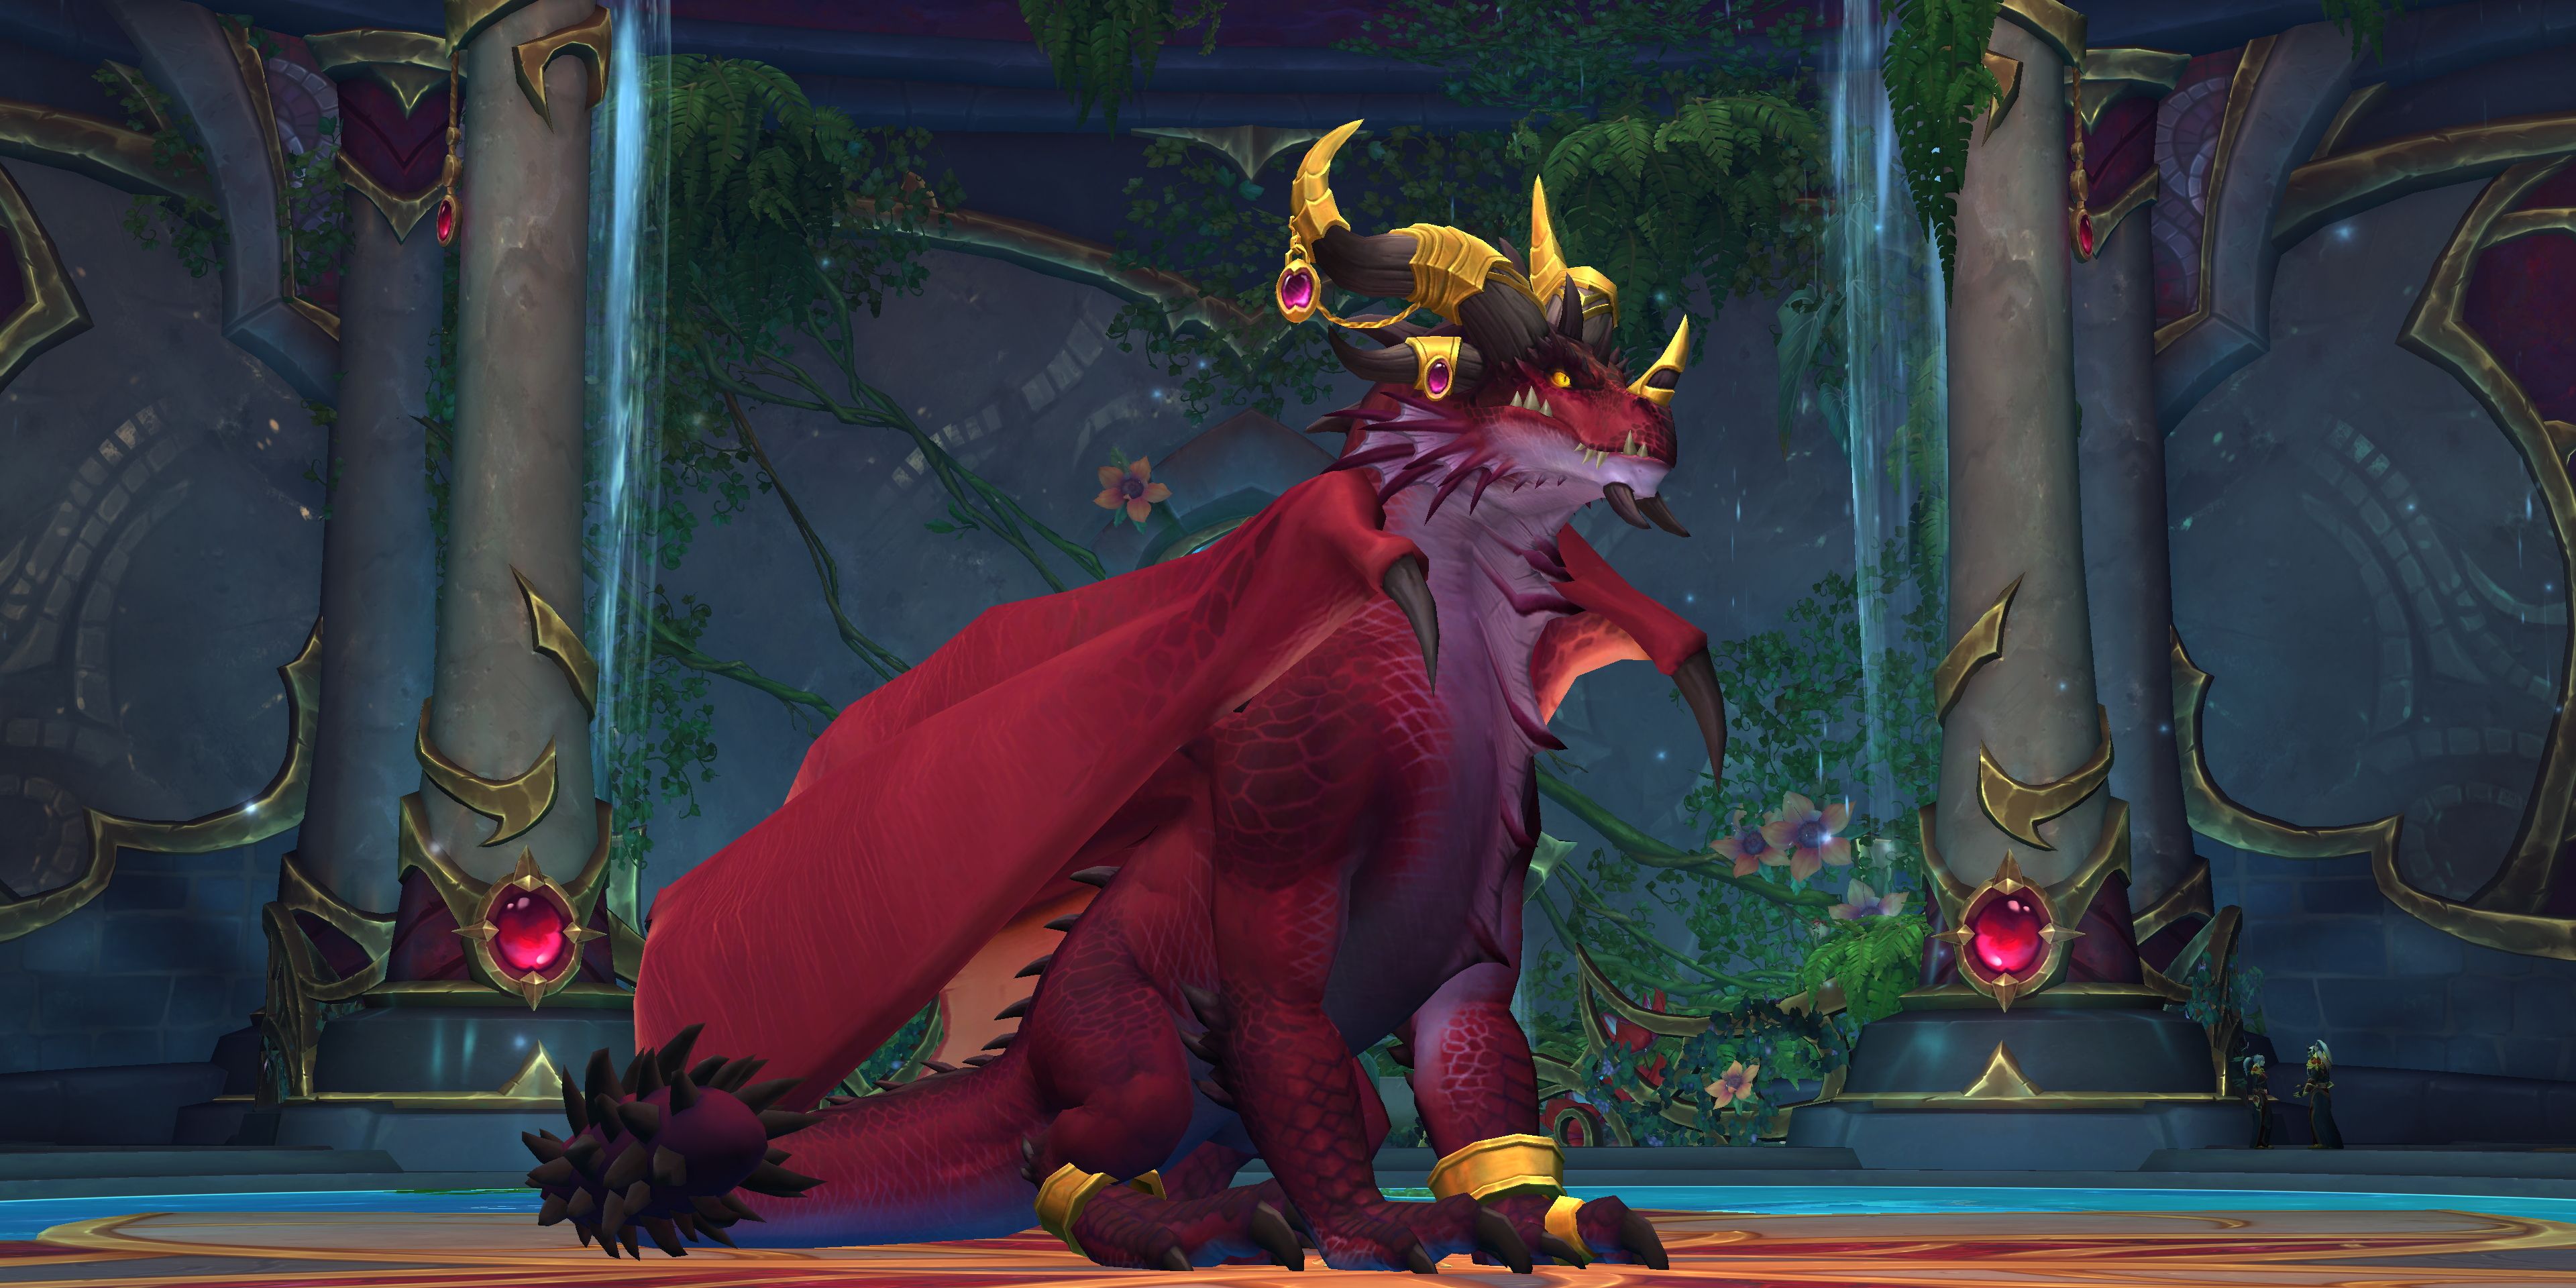 An image of World of Warcraft's Alexstrasza in her dragon form, a beautiful red dragon with jeweled gold and black horns and bracers